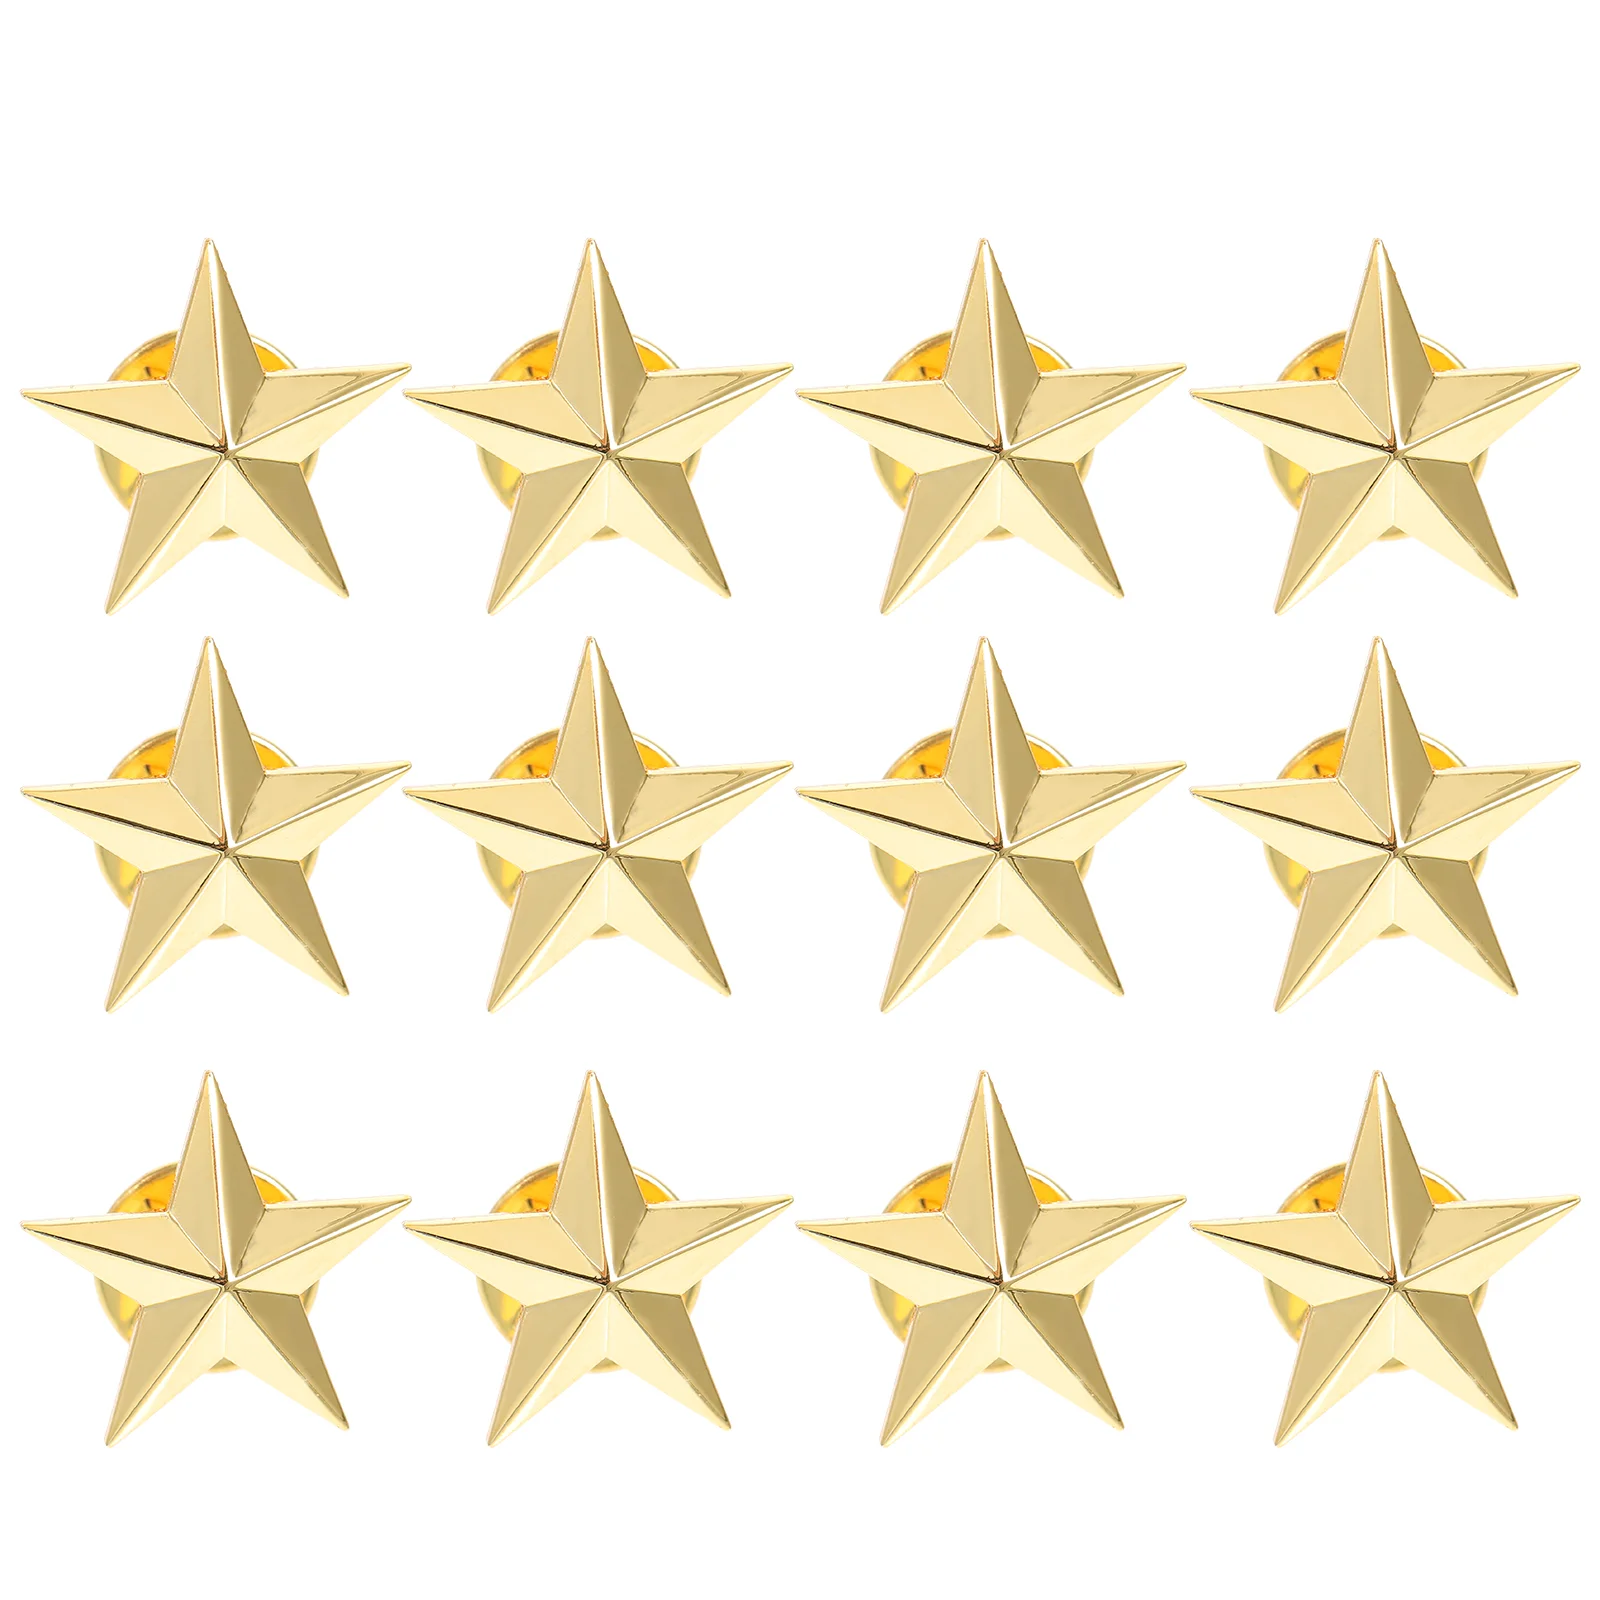 

12 Pcs Clothes for Men Pentagram Badge Star Shape Badges Decorative Pin Metal Lable Pins Veterans Day Party Supply Staff